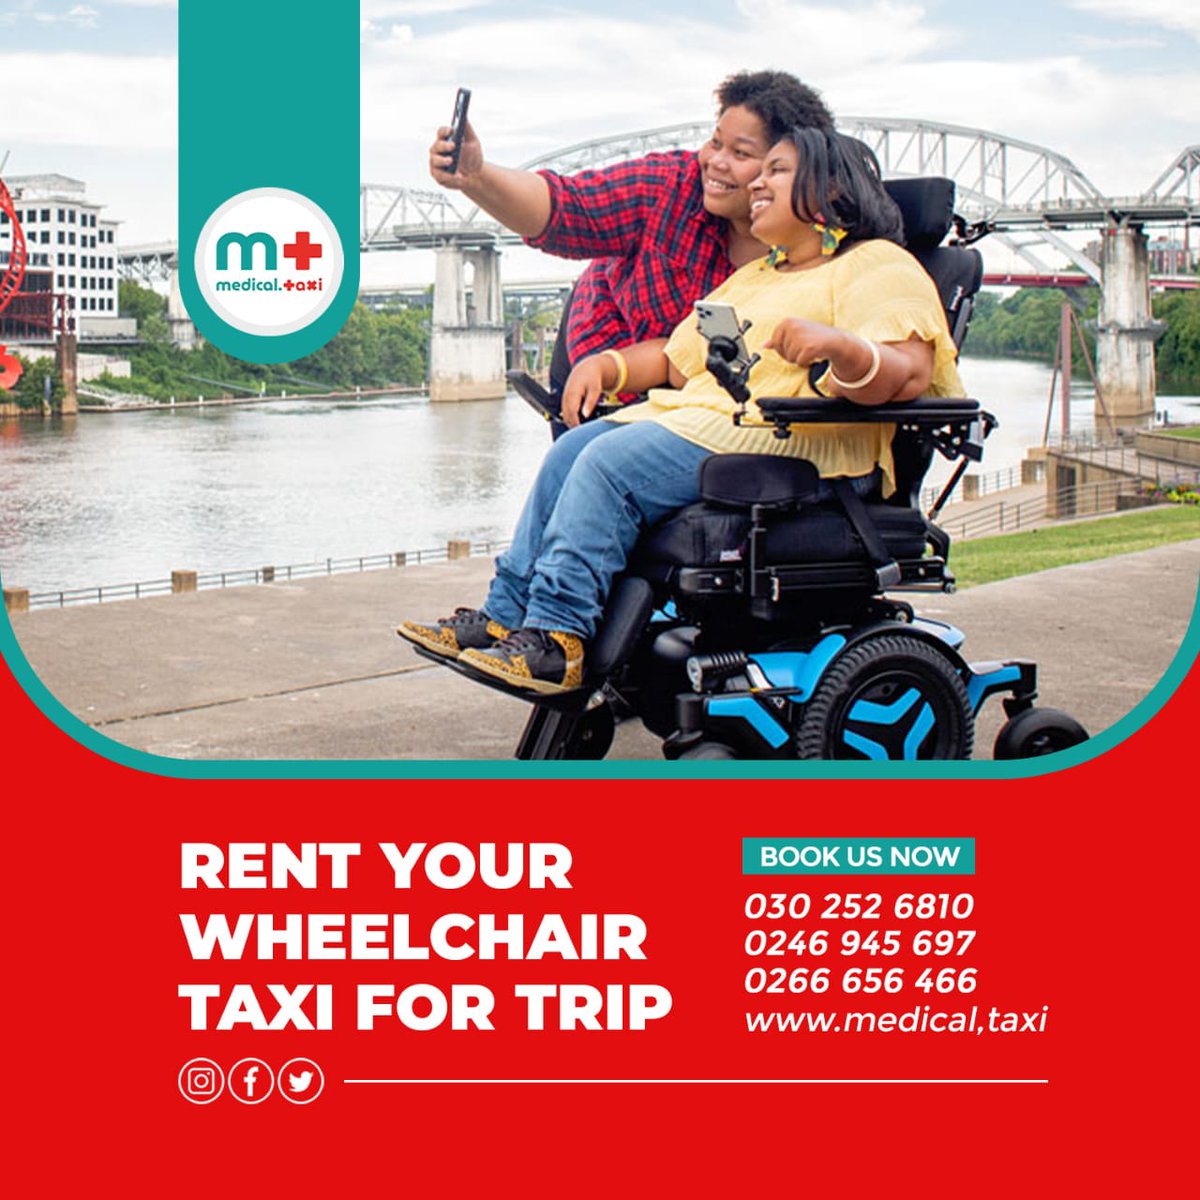 Get around Accra with ease in our wheelchair accessible taxis!  Book your ride today and enjoy the freedom and independence of accessible transportation in Accra by Medical Taxi.
☎️ 0246 945 697
☎️ 0266 656 466

#accessibletaxi #ghana 
#Accra #taxi #wheelchairvan